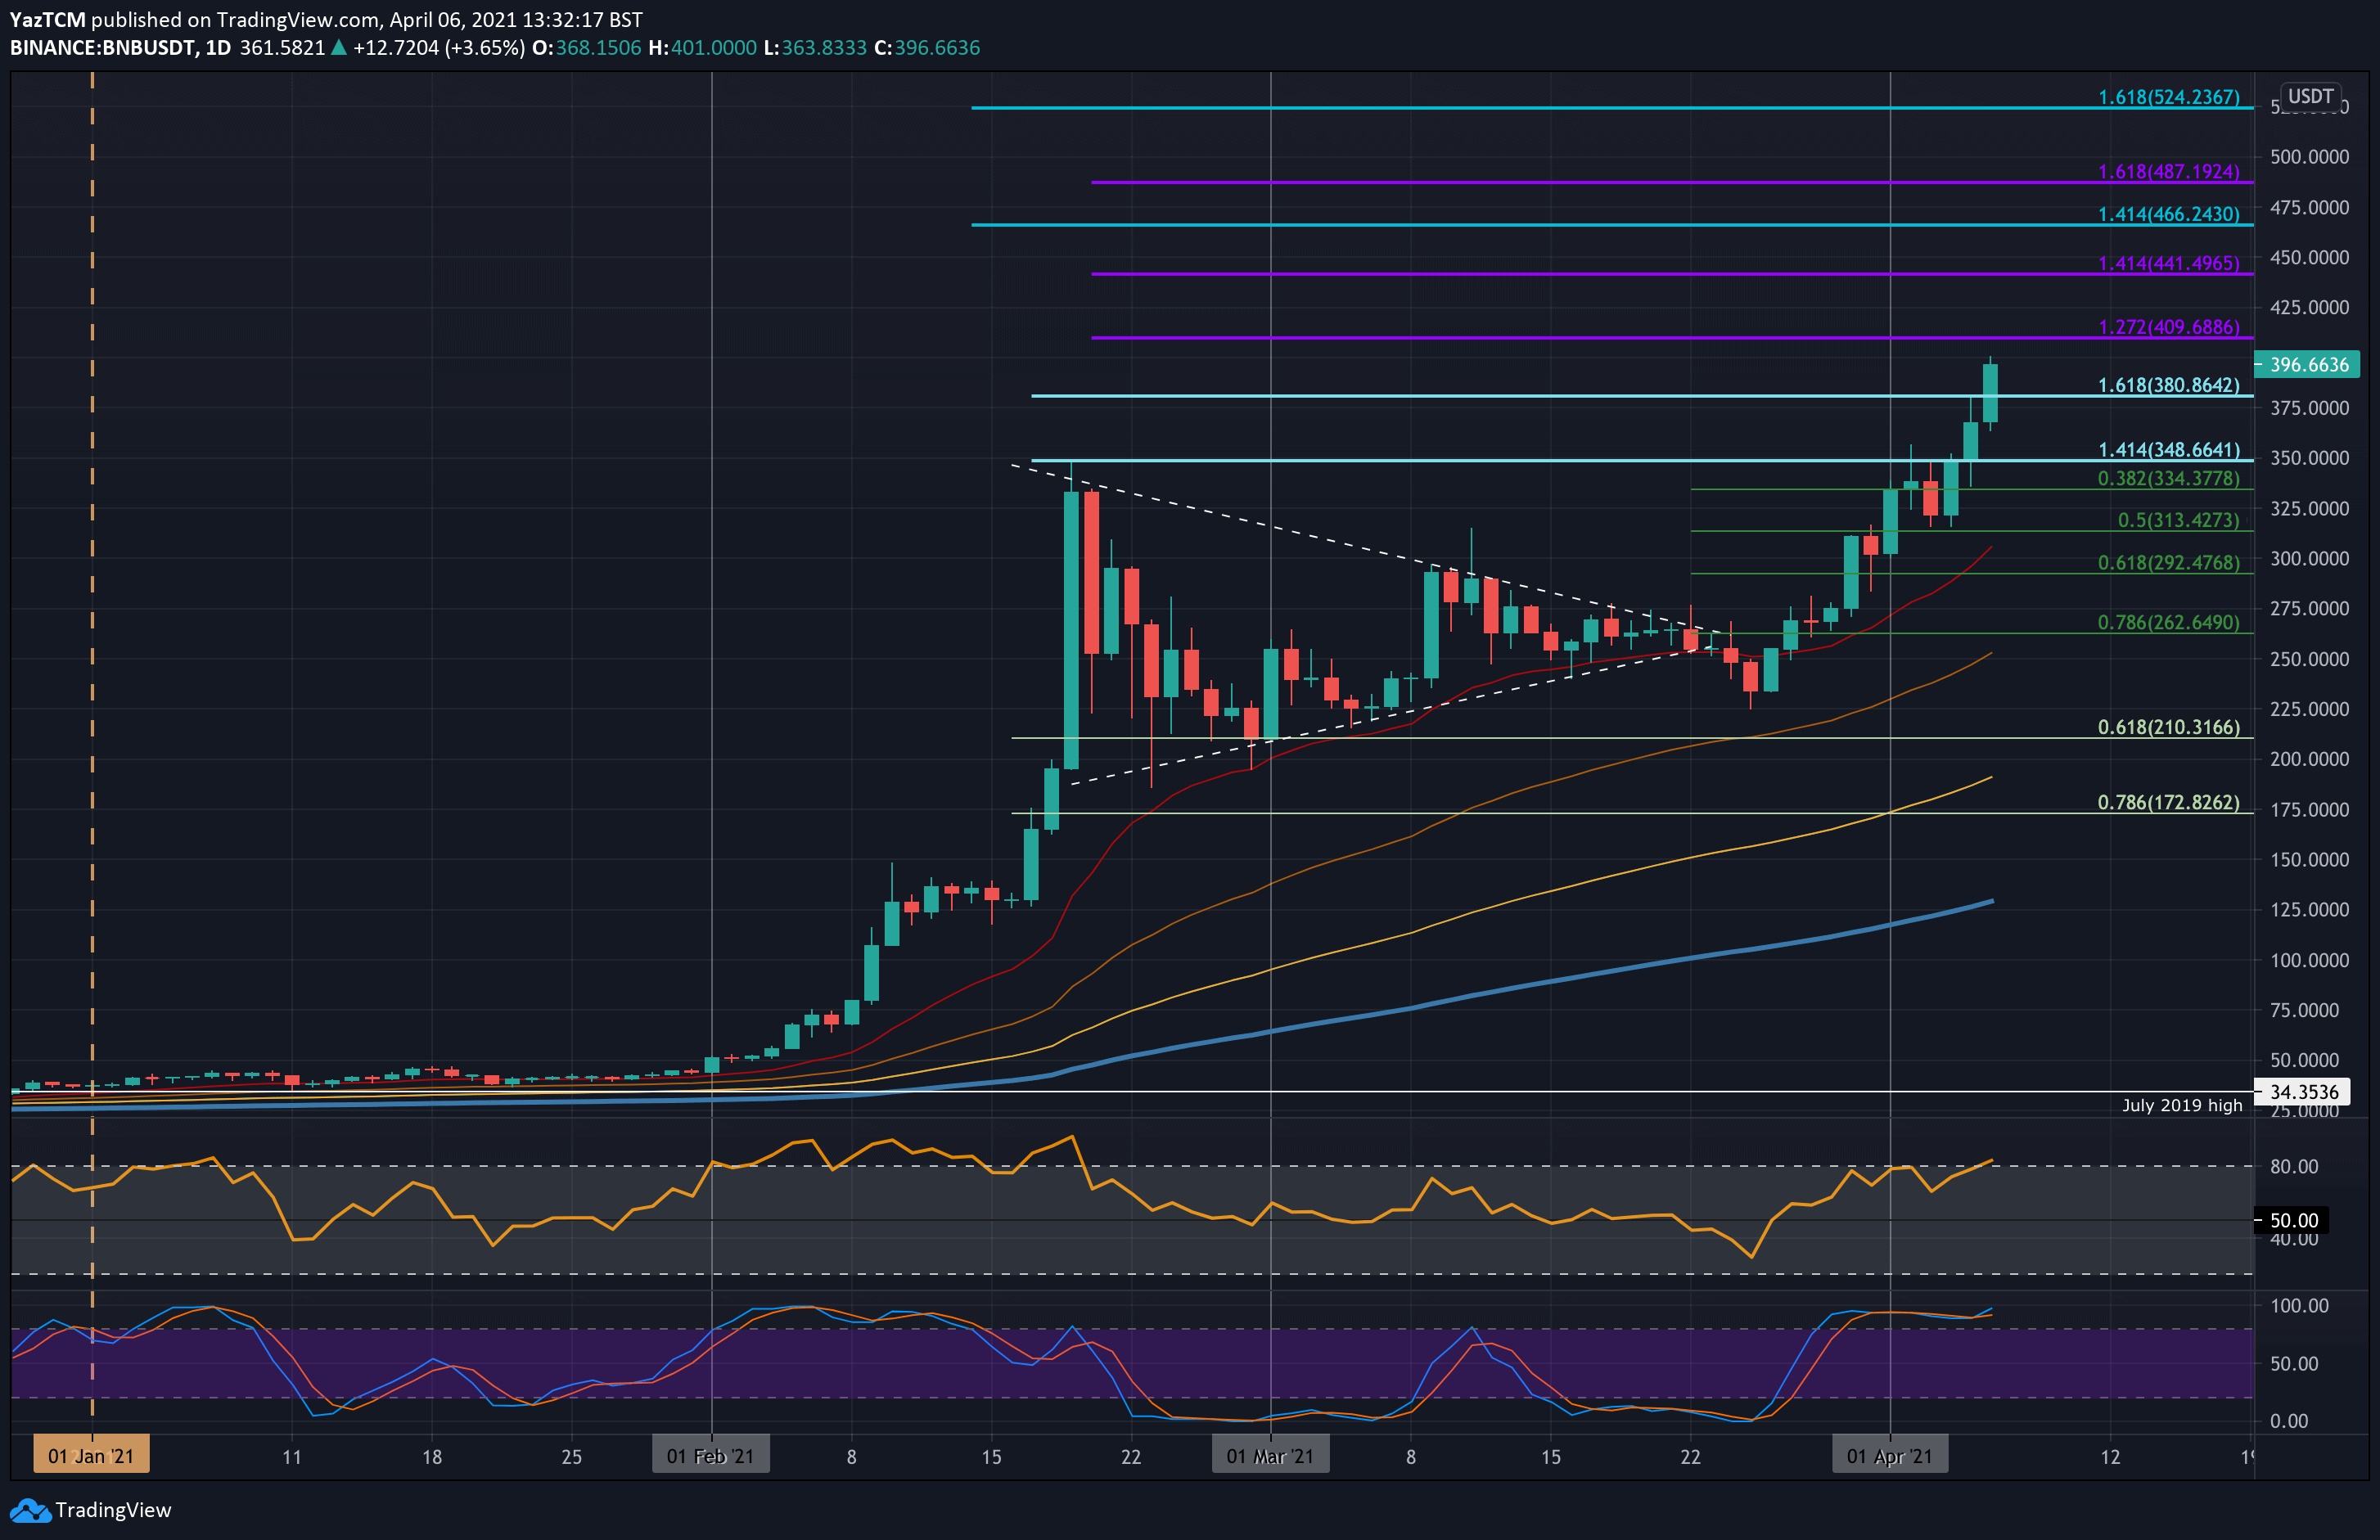 BNB USD Price: Live Chart - CryptoPurview